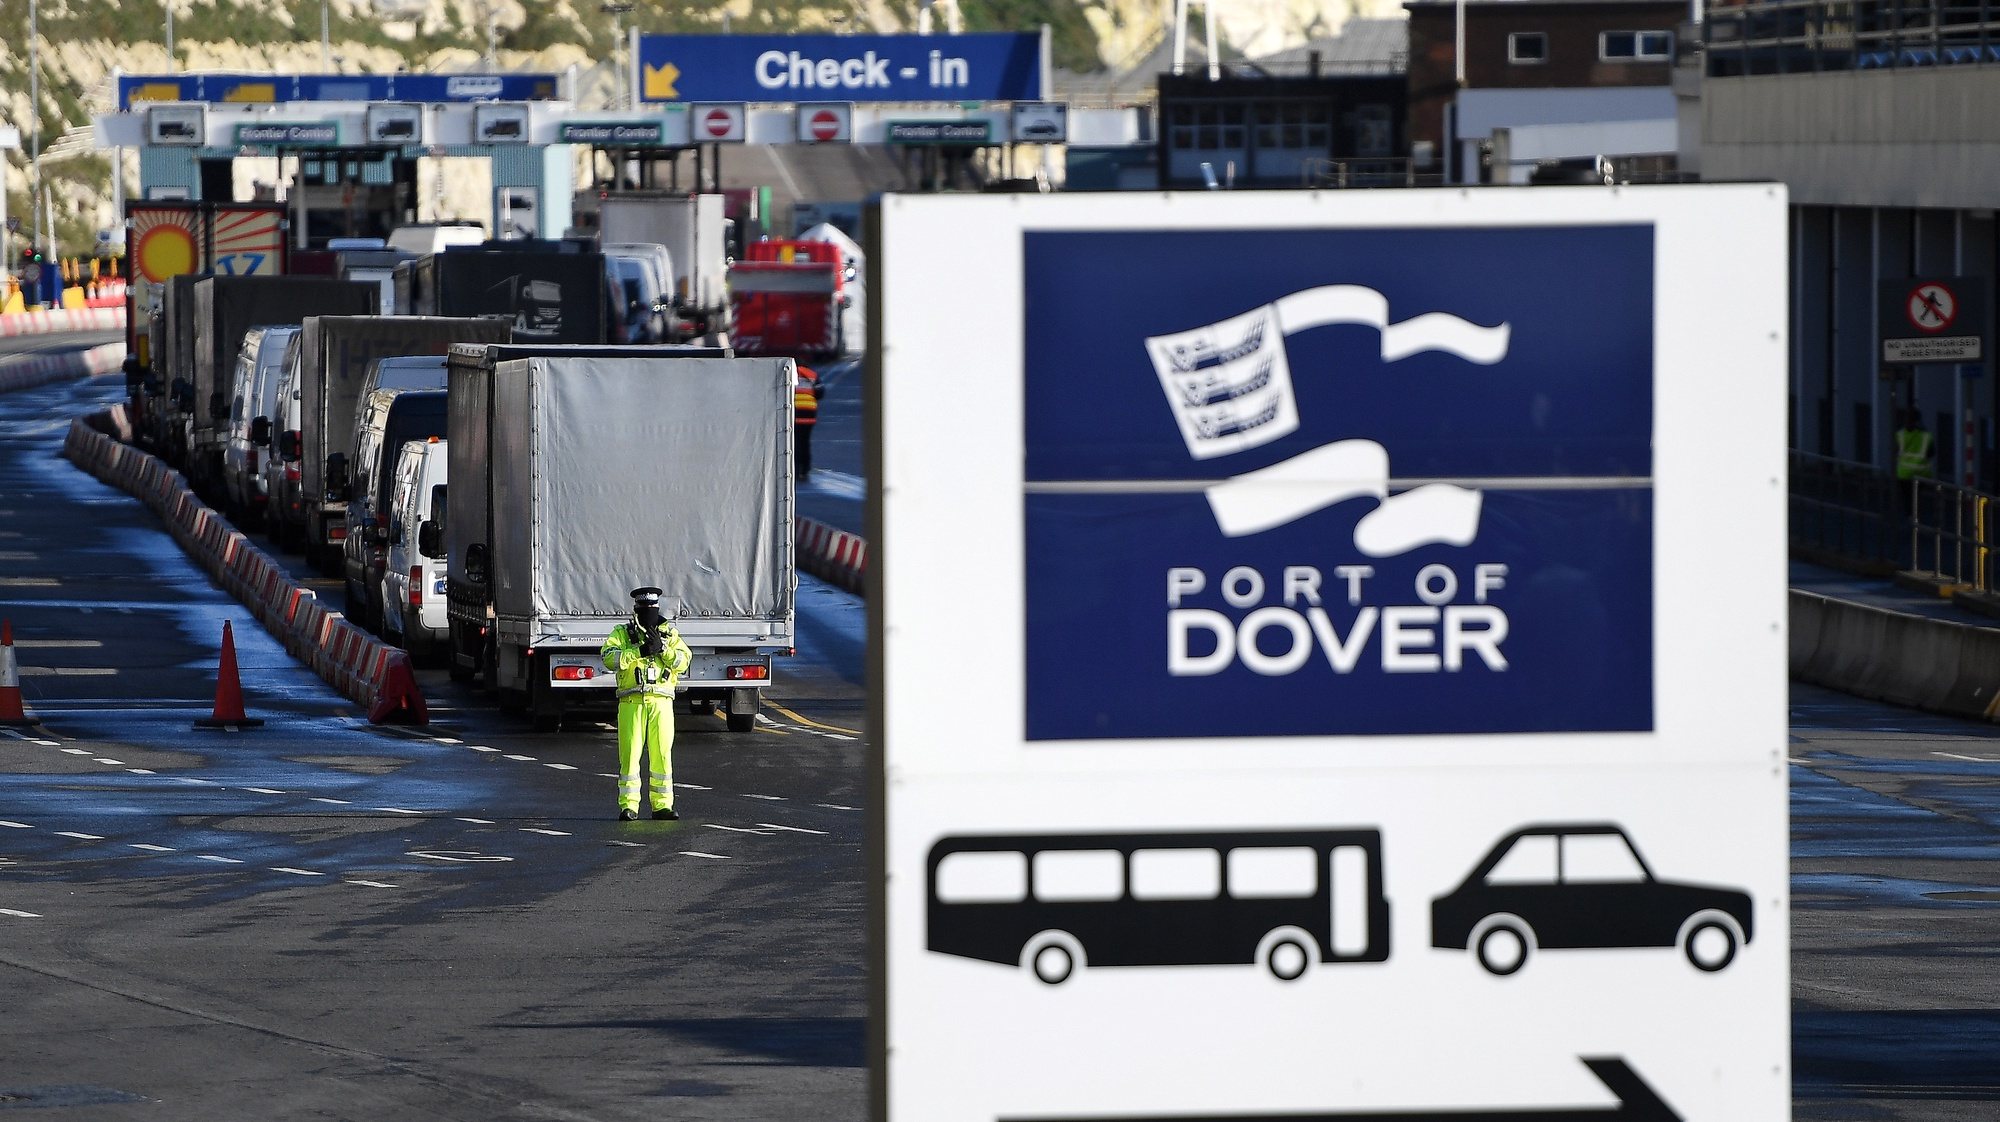 epa08902586 Freight trucks and other vehicles make their way through the Port of Dover in Dover, Britain, 24 December 2020. Dover Port has reopened its border after France closed its border with Britain for 48 hours over concerns about the new coronavirus variant. Lorry drivers must now obtain negative coronavirus tests before they will be allowed to cross by sea and the Port of Dover remains closed to outbound traffic on the morning of 23 December 2020.  EPA/ANDY RAIN